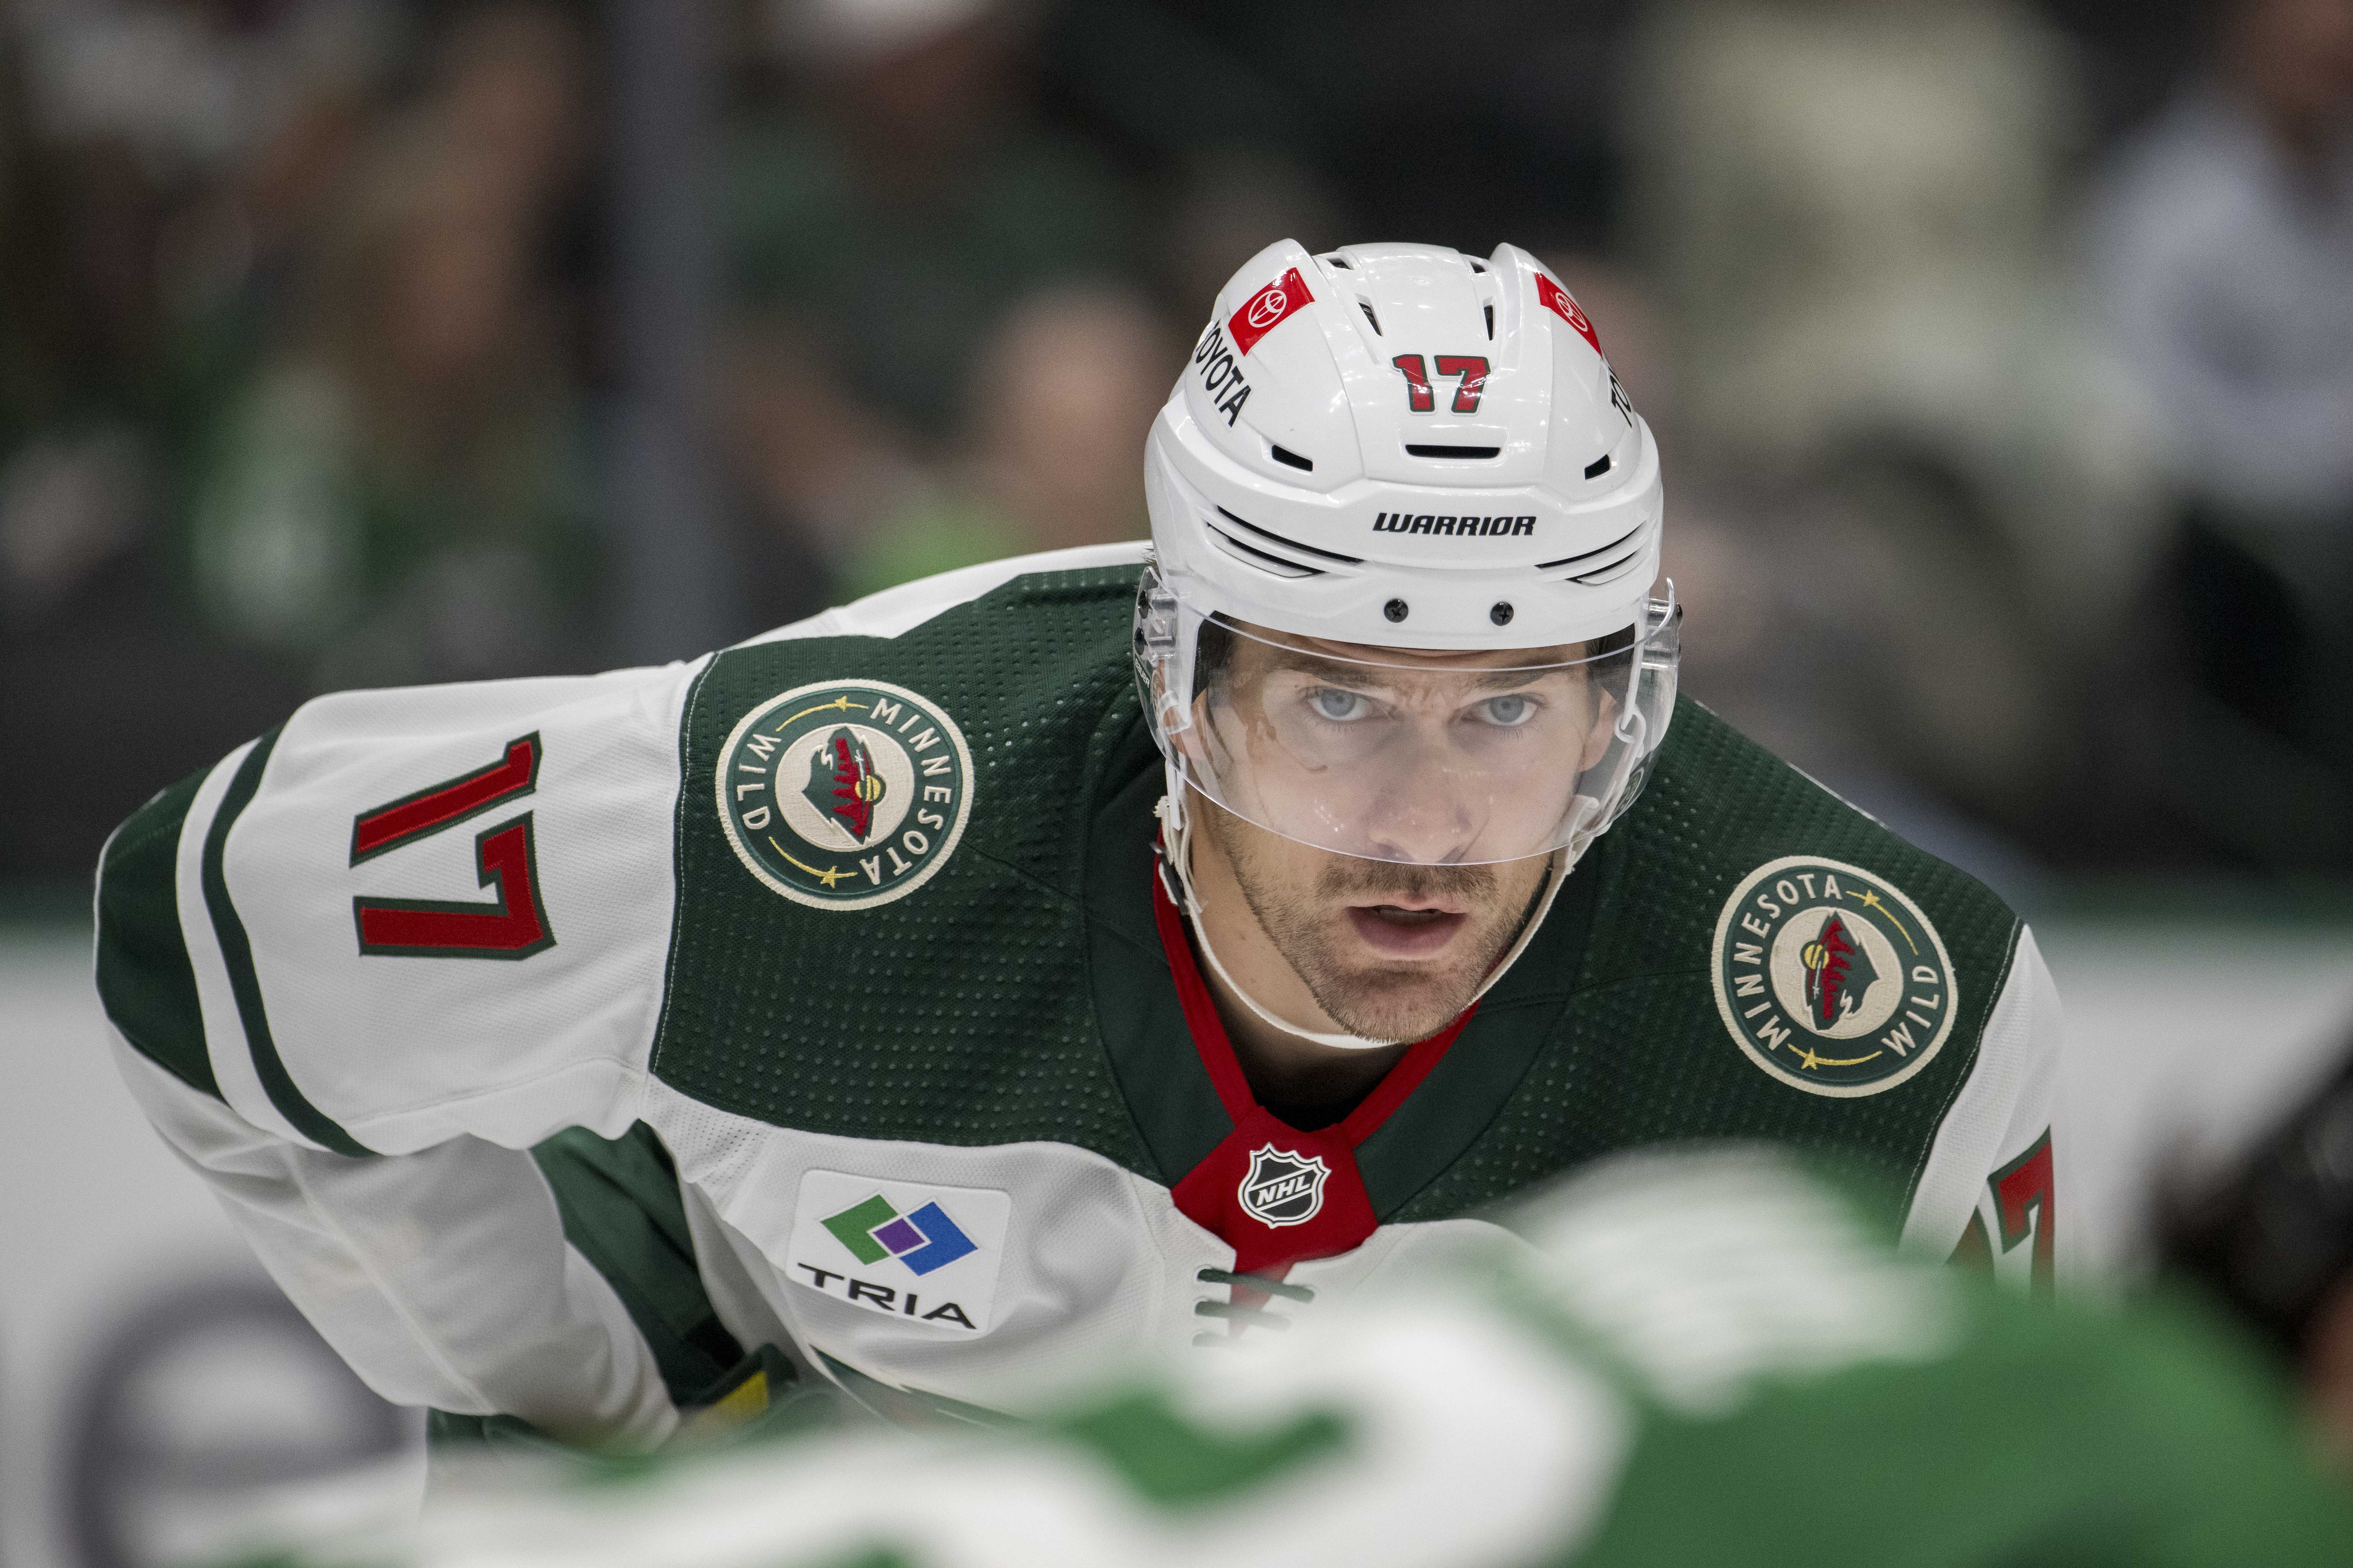 Marcus Foligno - NHL Left wing - News, Stats, Bio and more - The